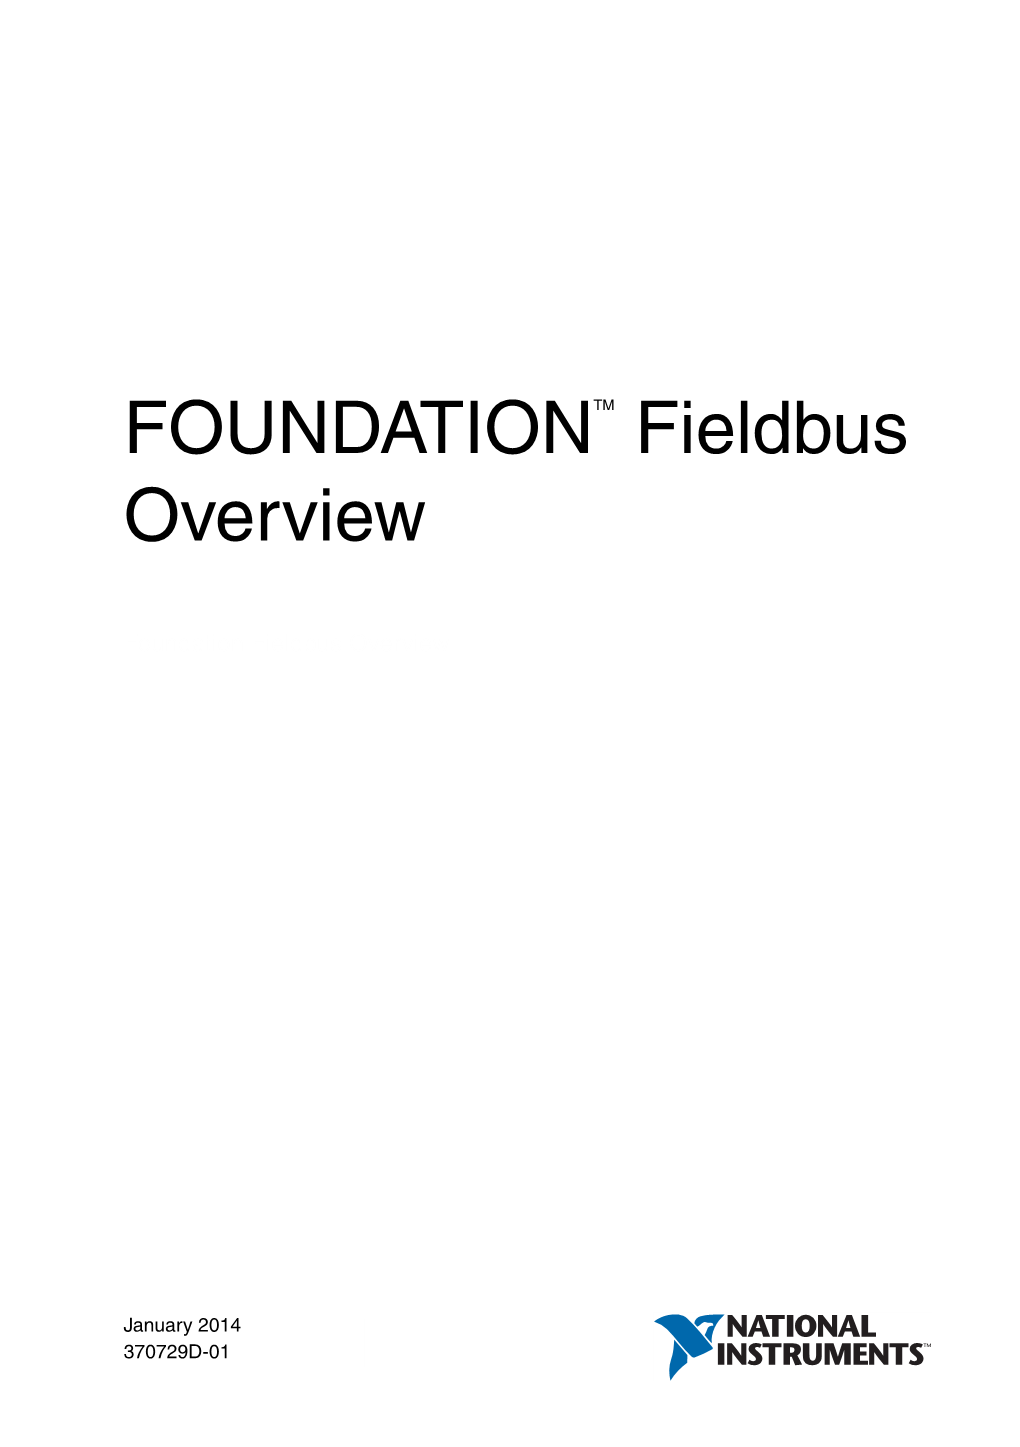 Foundation Fieldbus Overview